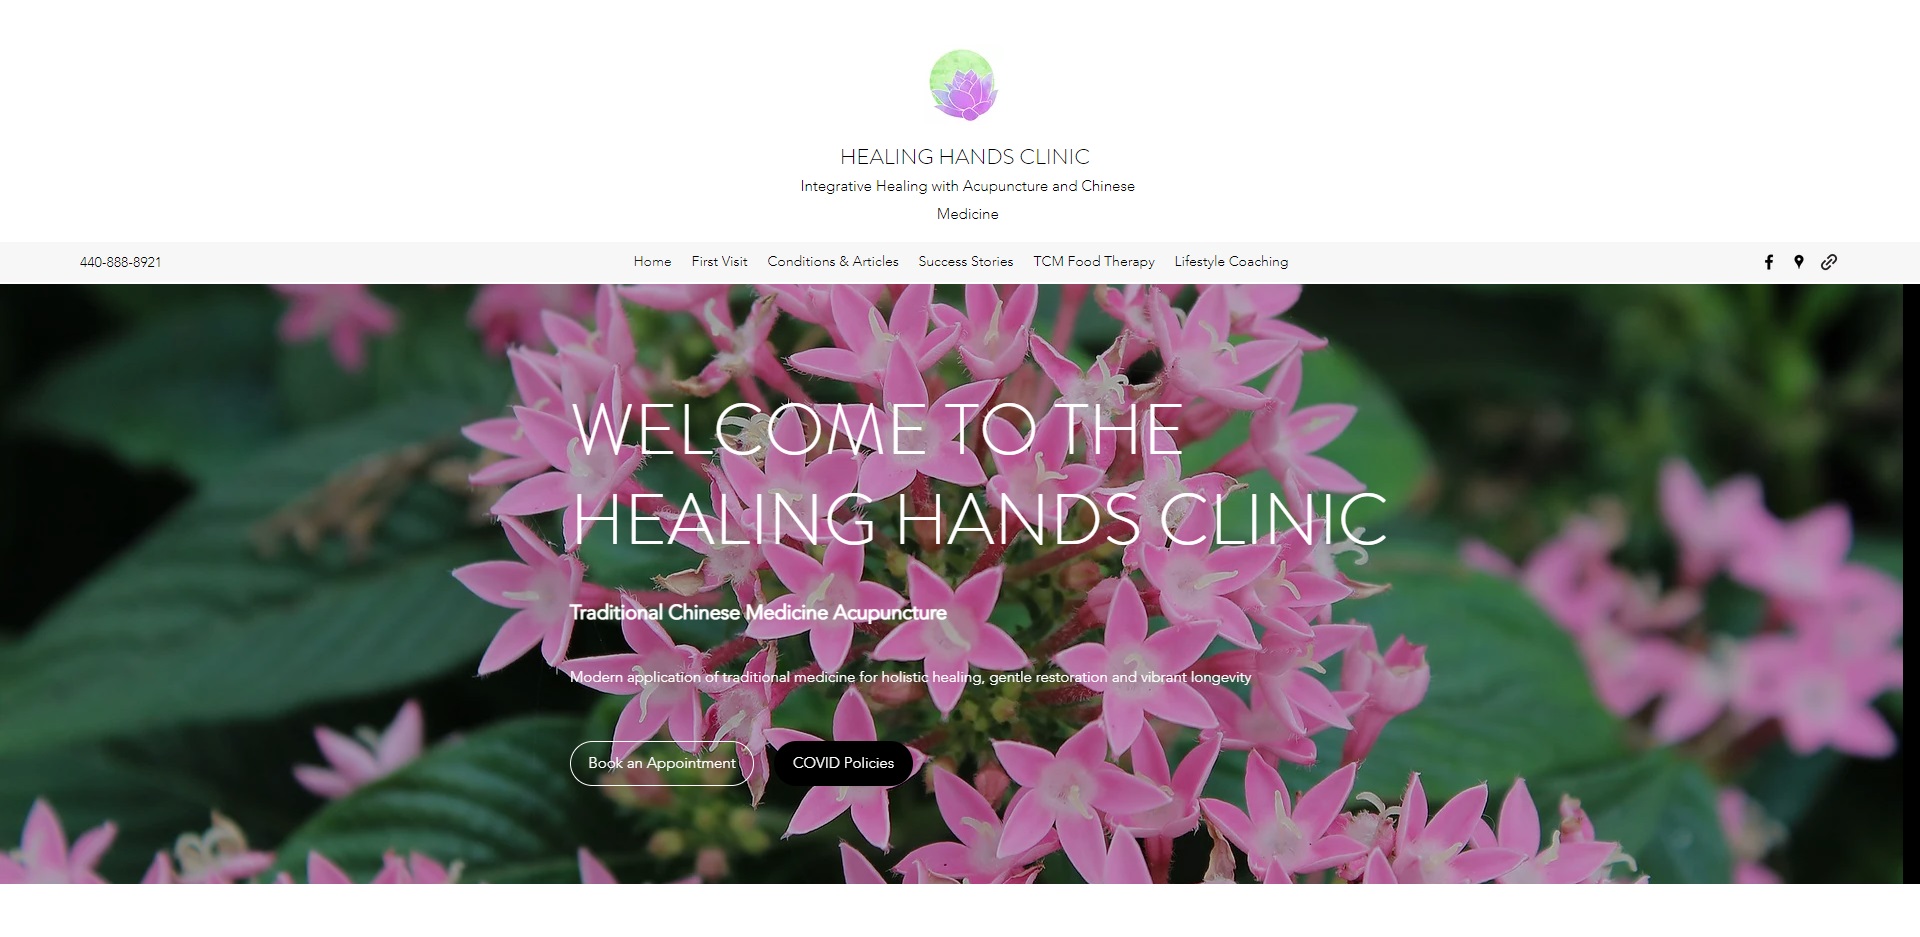 The Best Acupuncture in Cleveland, OH